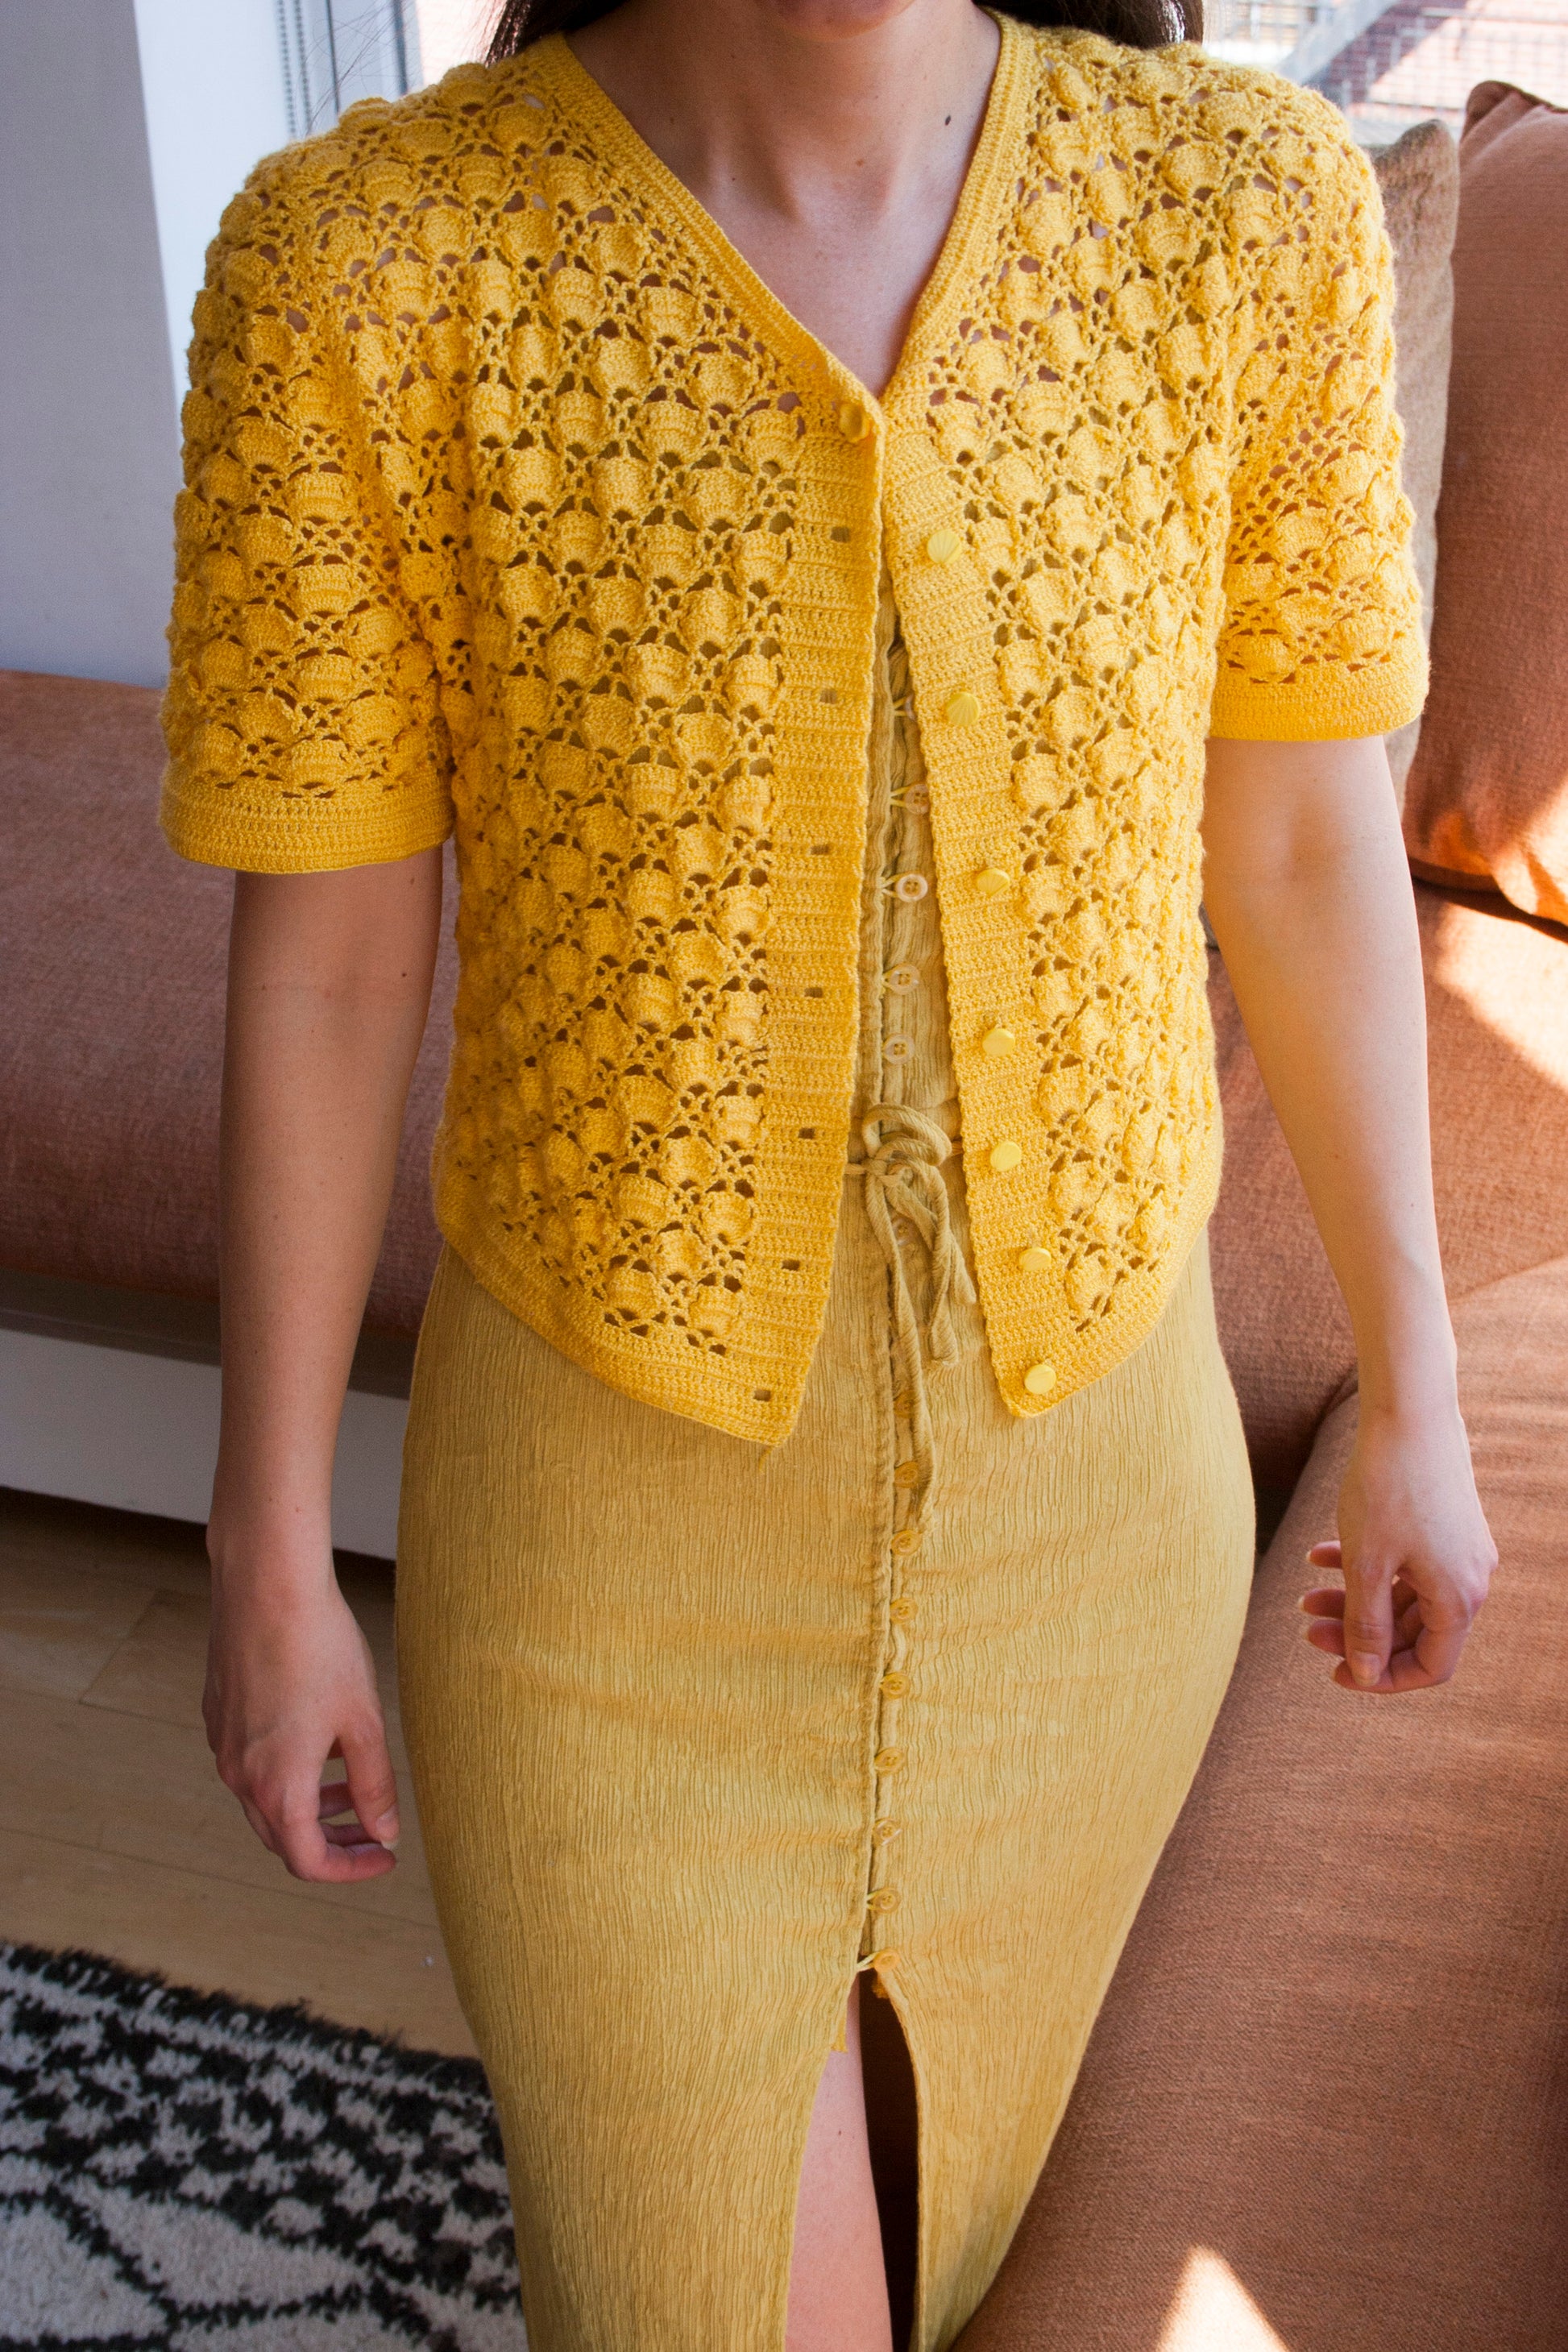 Model wearing the sunshine crochet cardigan, buttoned at the top